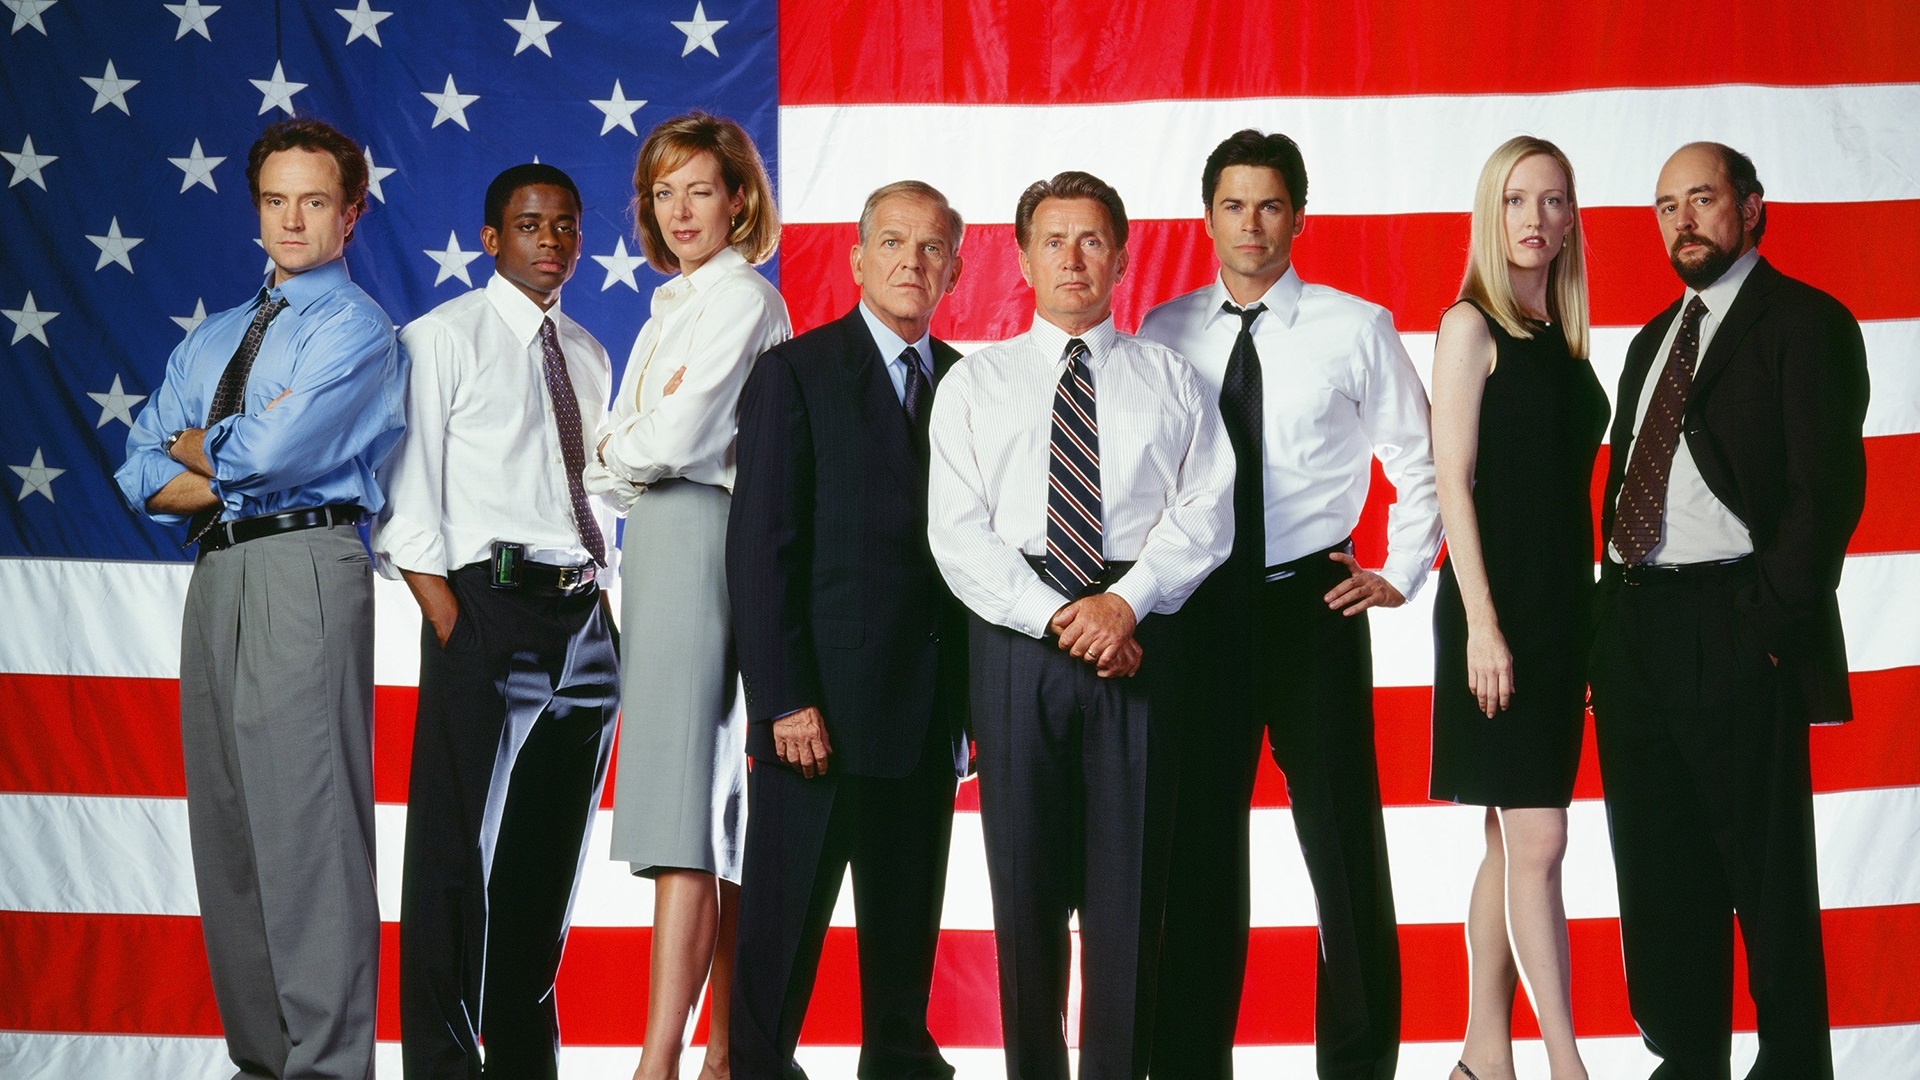 The West Wing (TV Series): The members of the fictitious Democratic administration of President Josiah Bartlet. 1920x1080 Full HD Background.